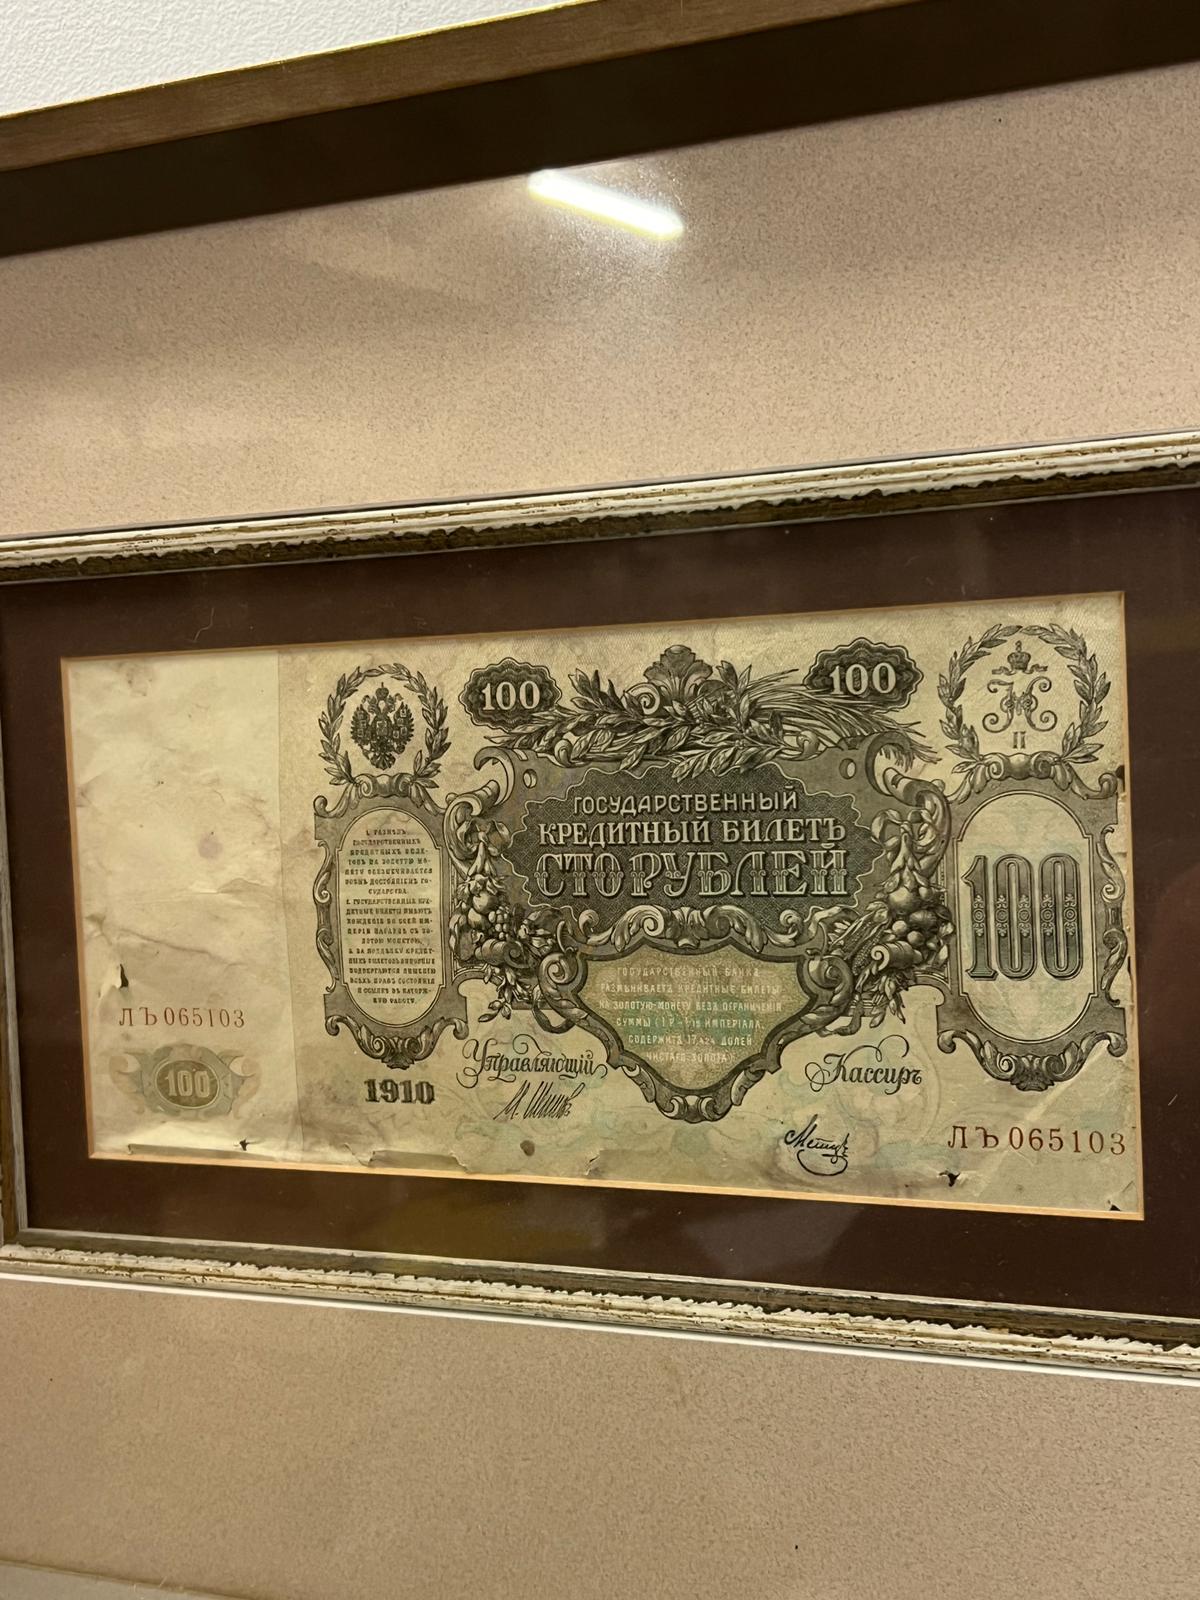 Ancient Empire Russian framed bank note - Image 2 of 4